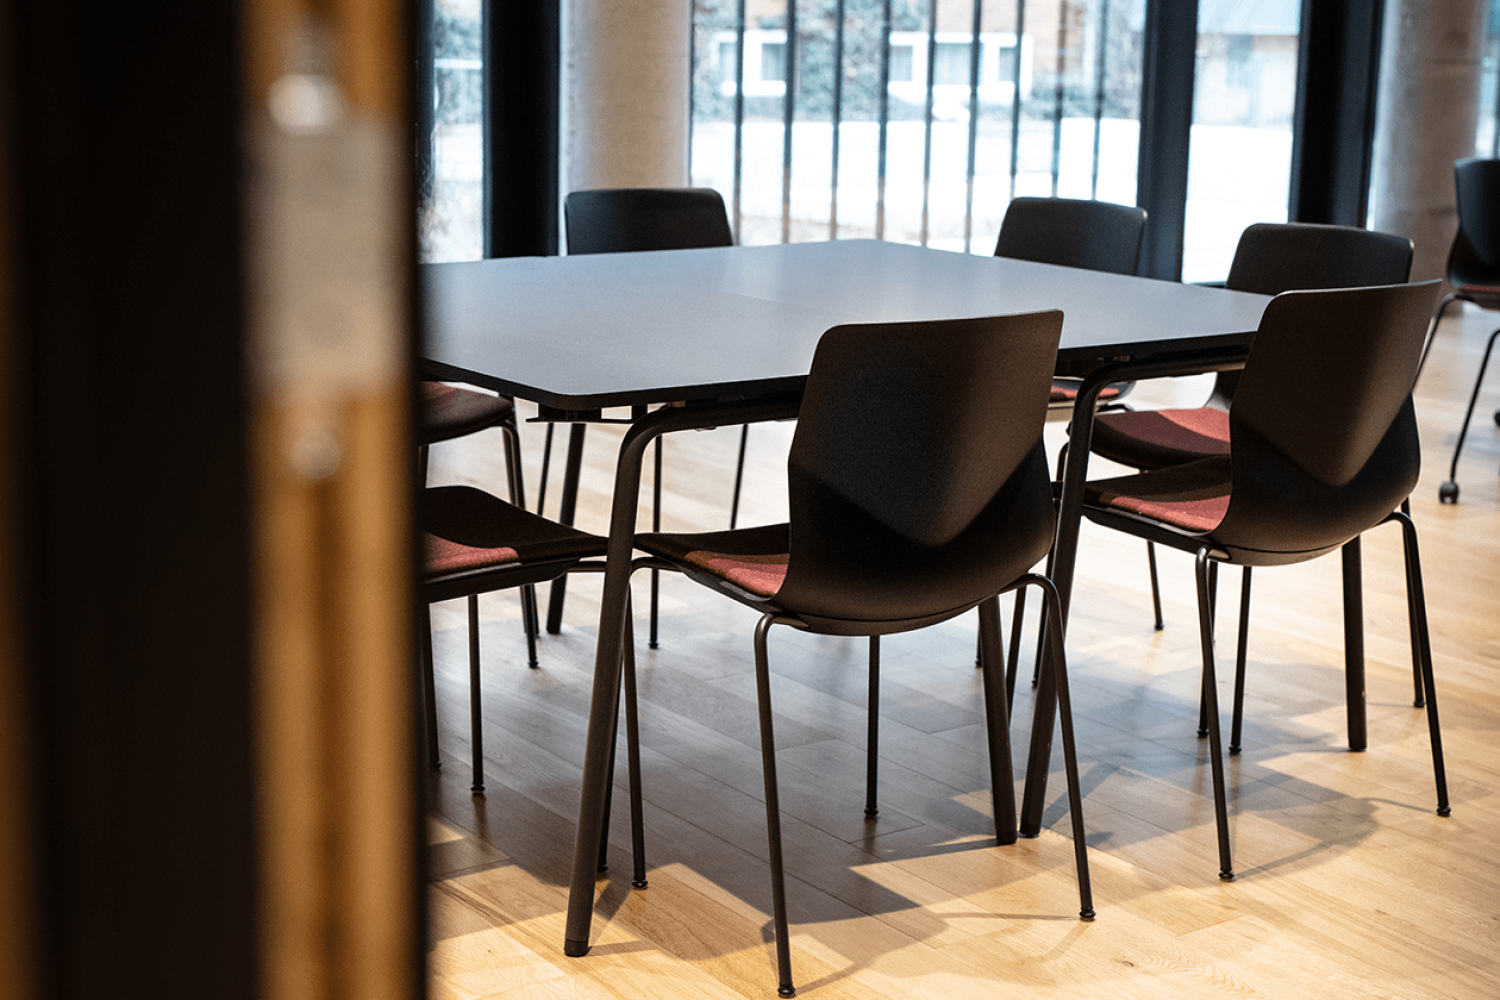 Canteen furniture including black table and chairs in a dining room.